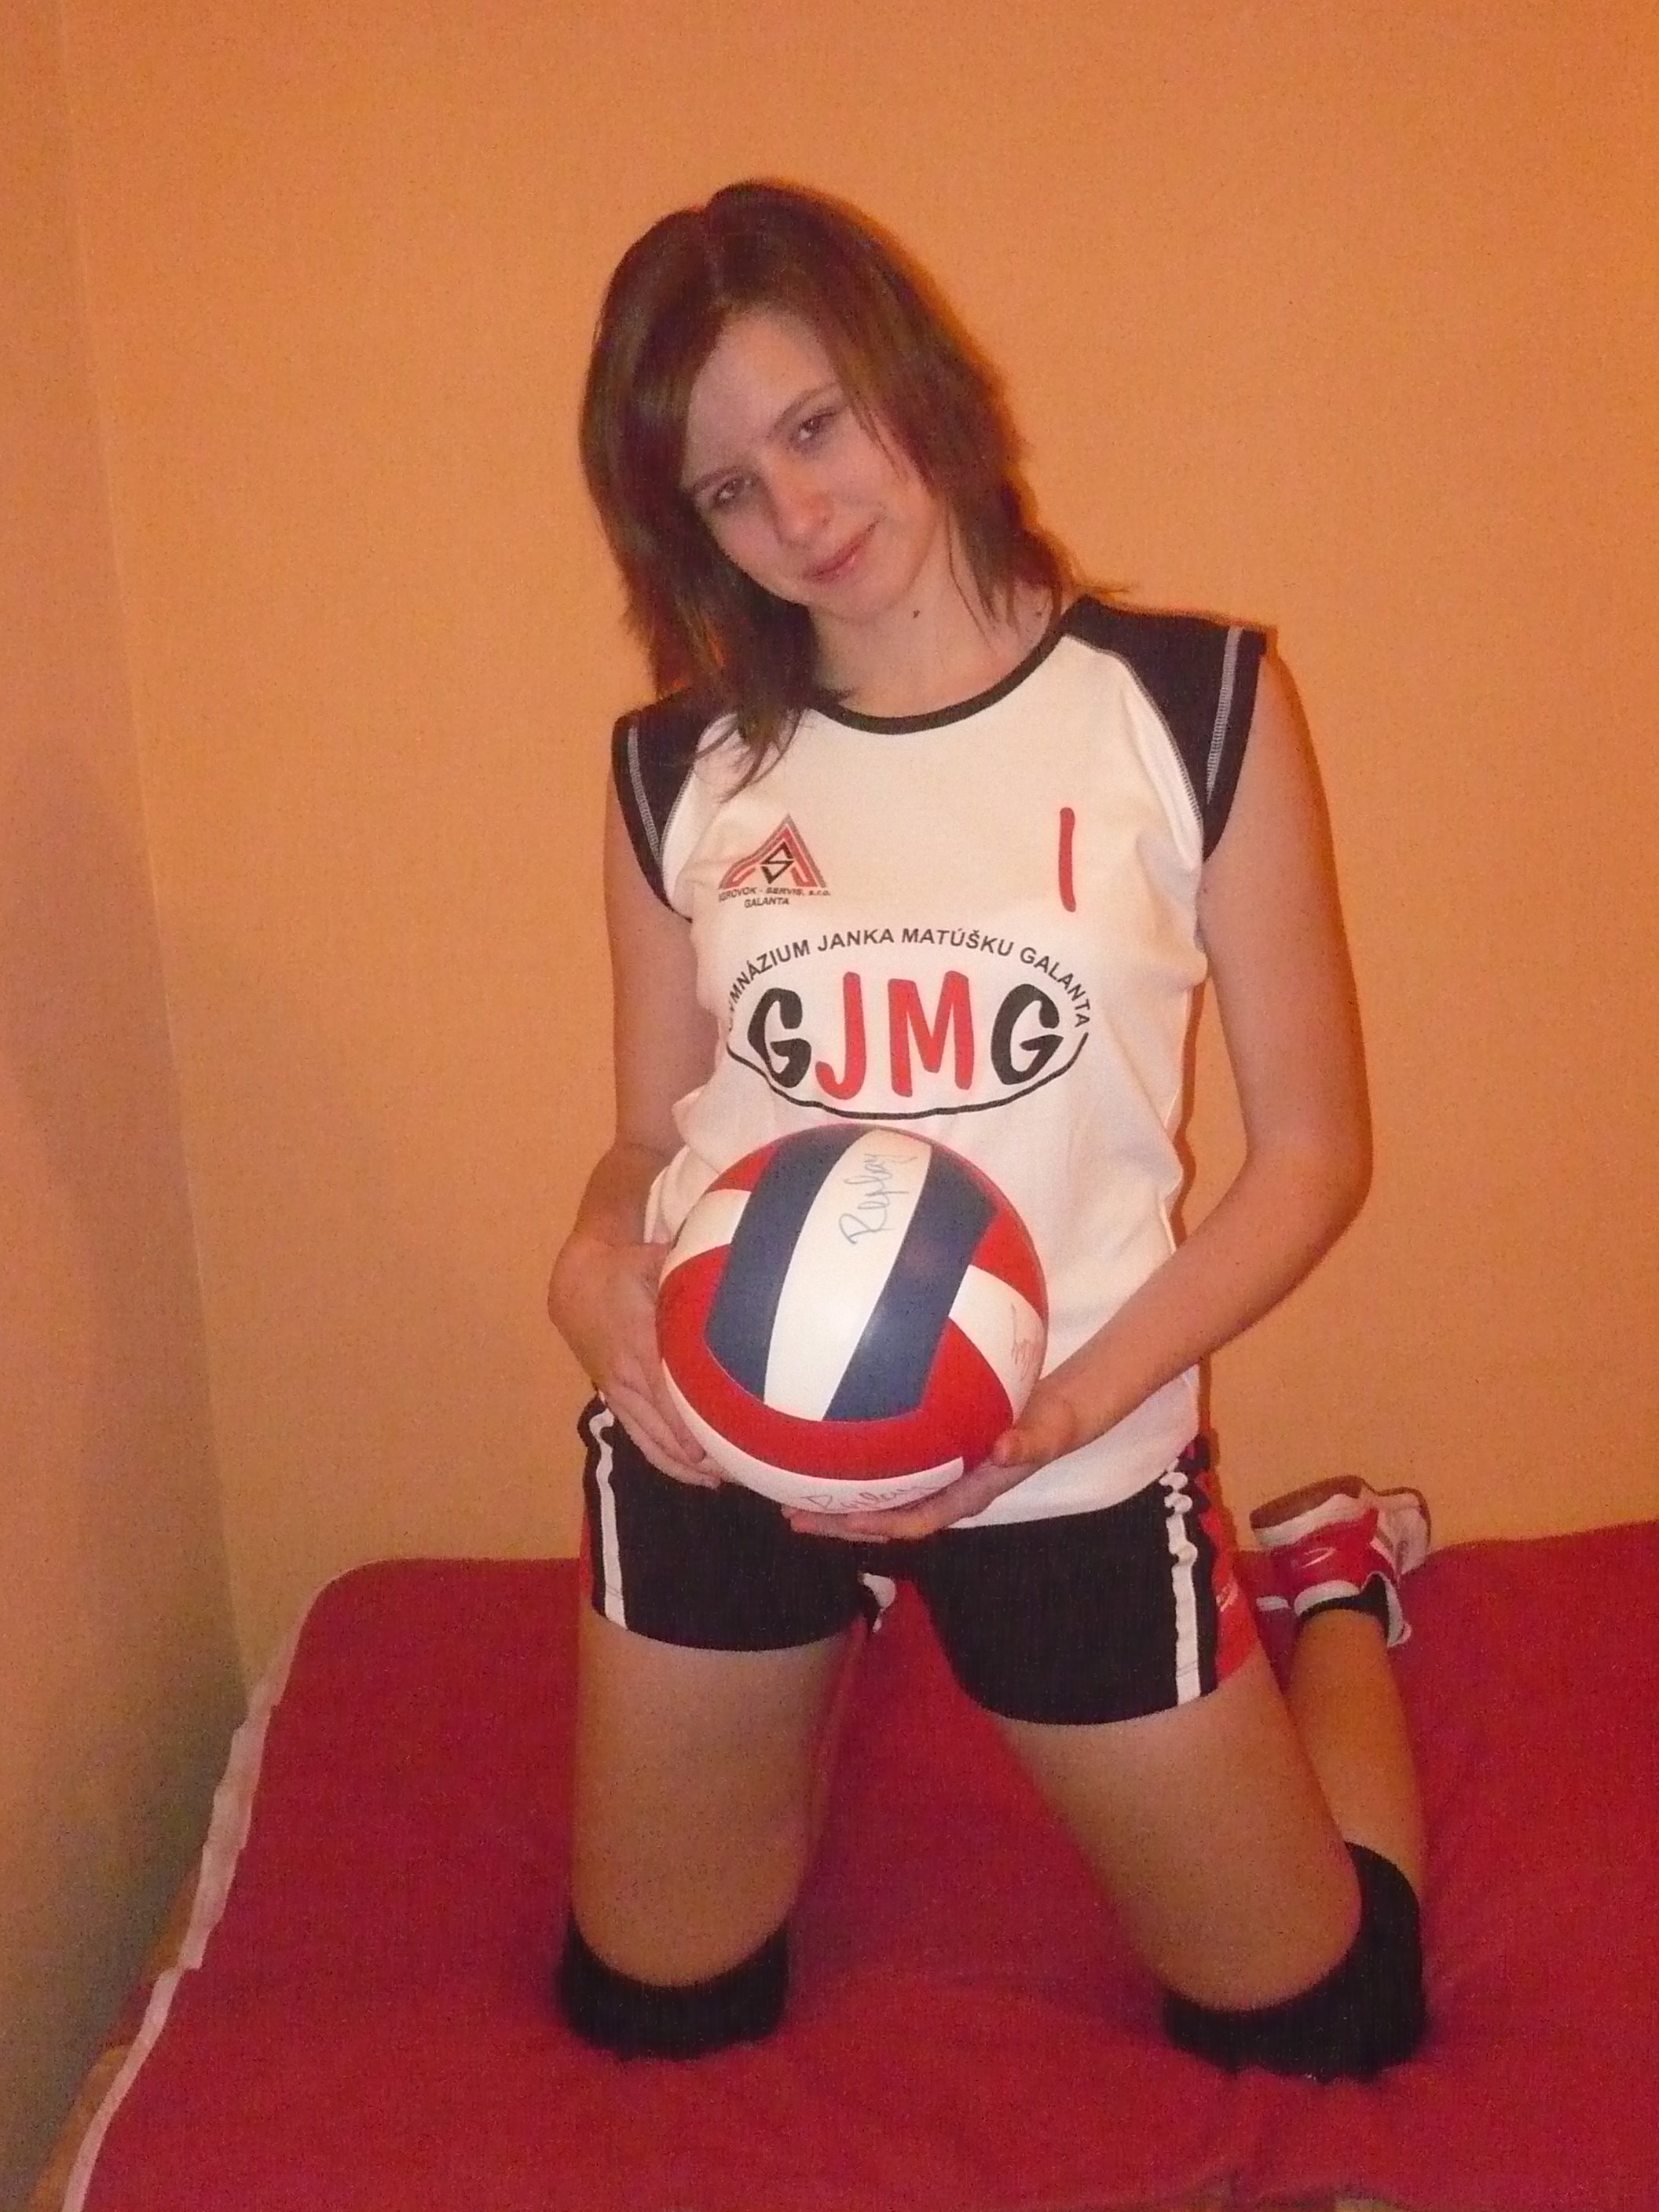 This is me before the action (volley)... Any reaction?:-D